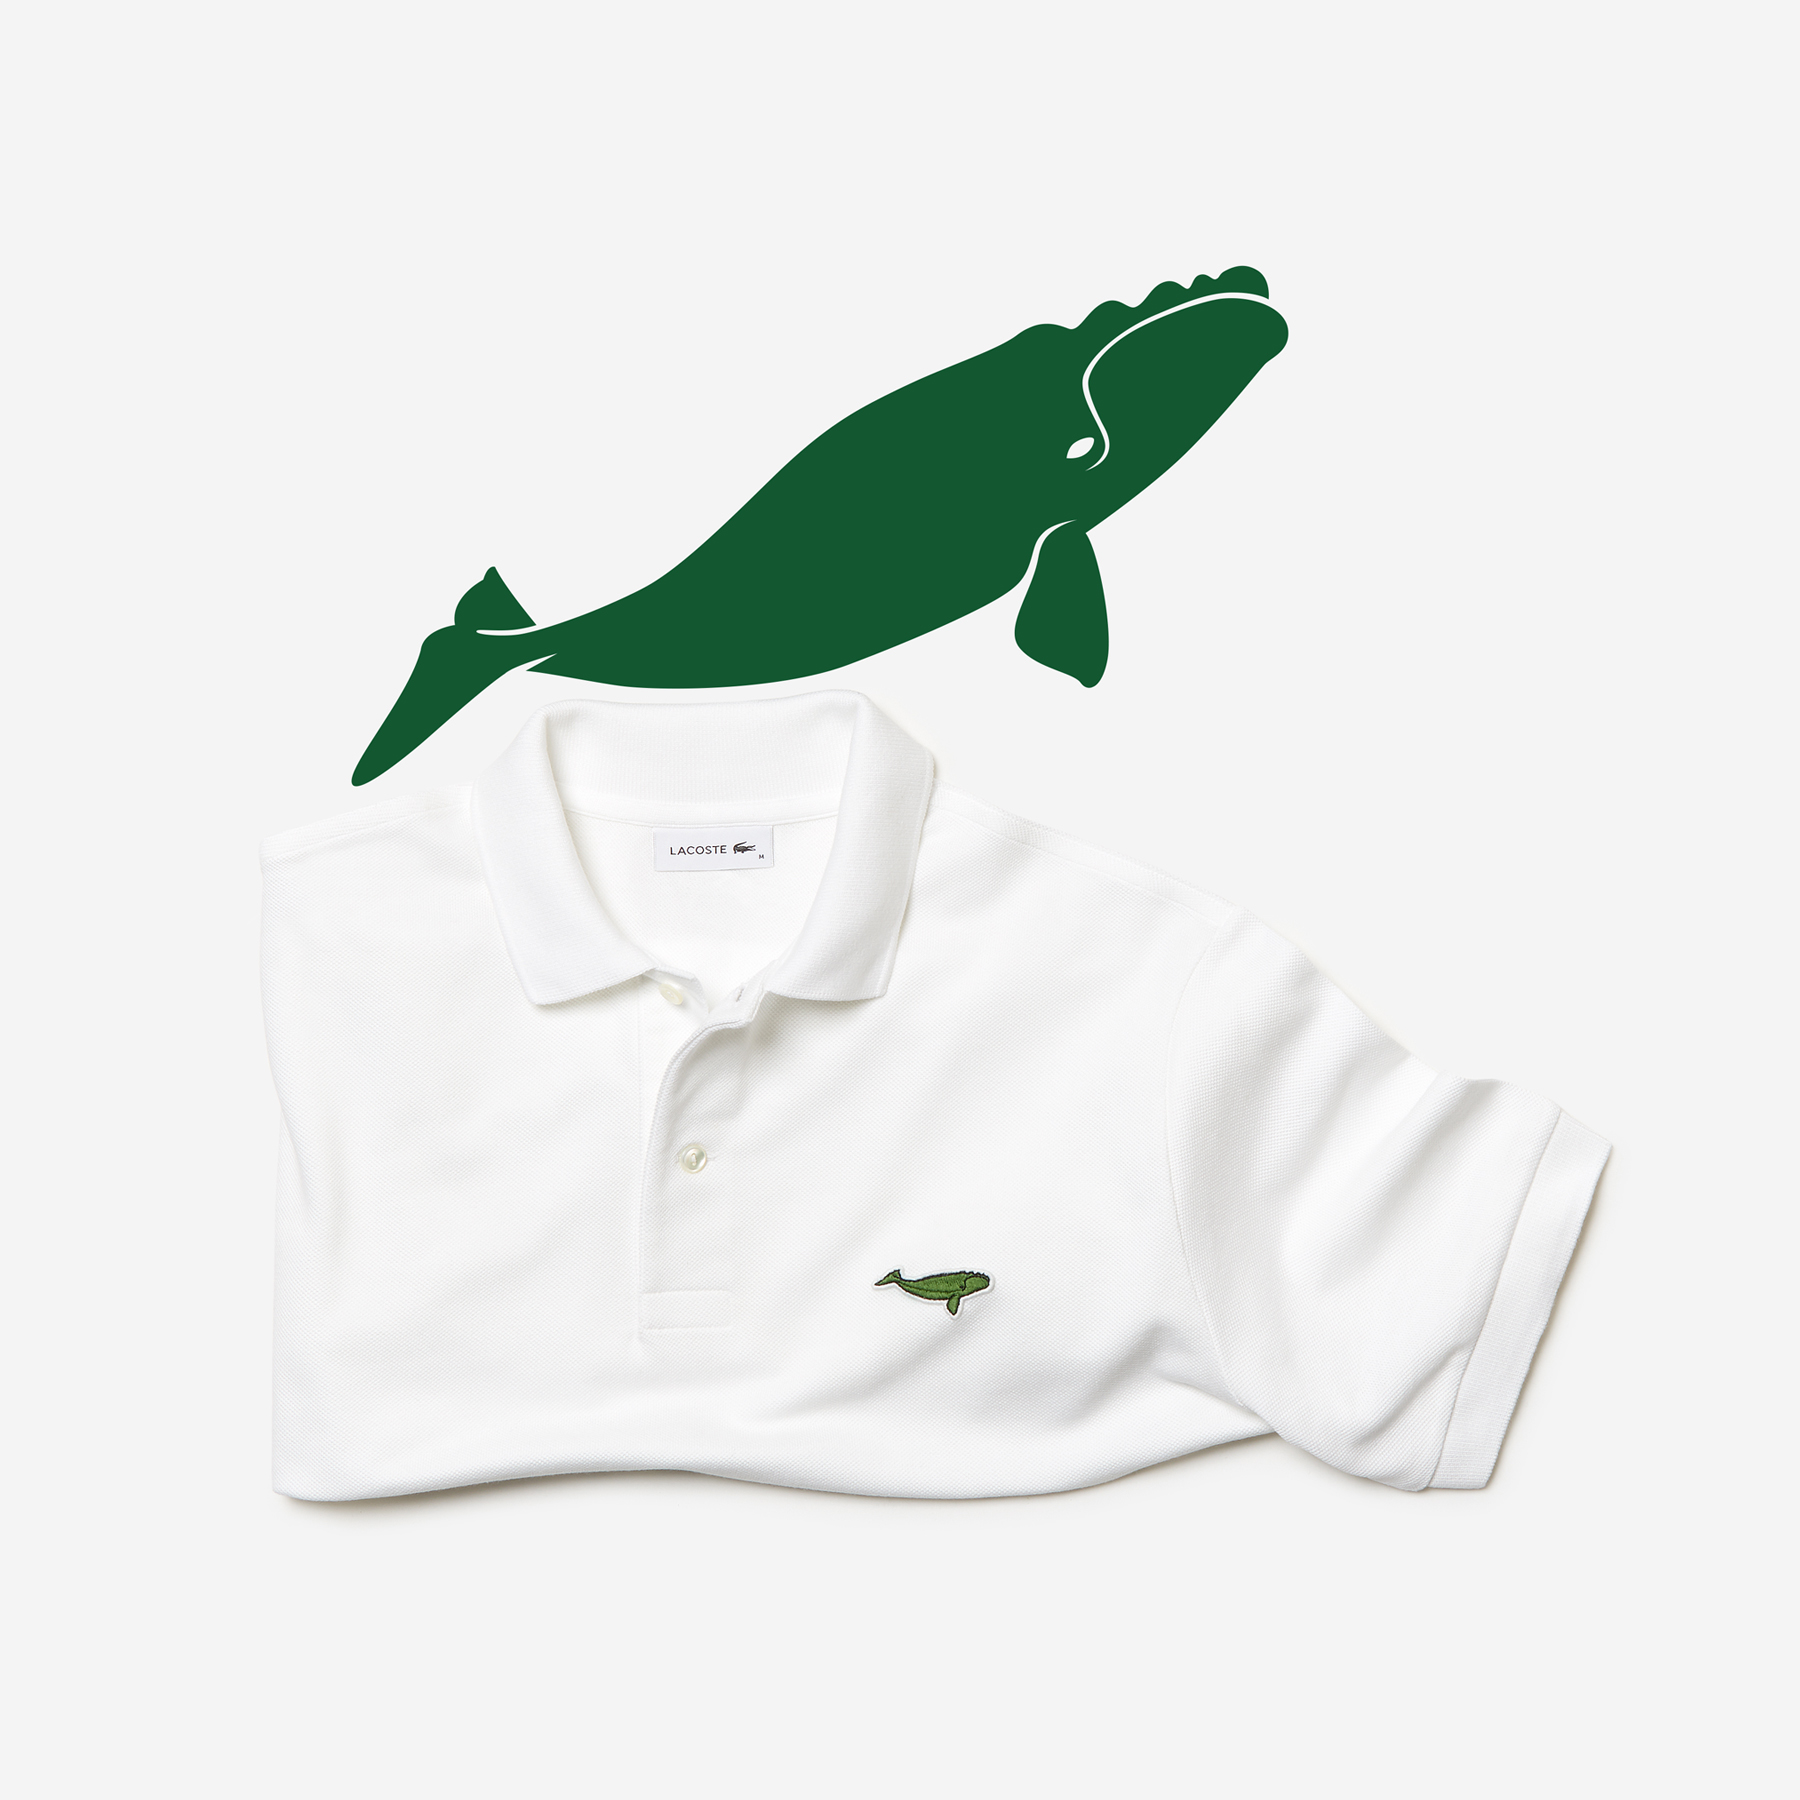 tuberkulose etc Vælge Lacoste x Save Our Species (IUCN) — SSI Life